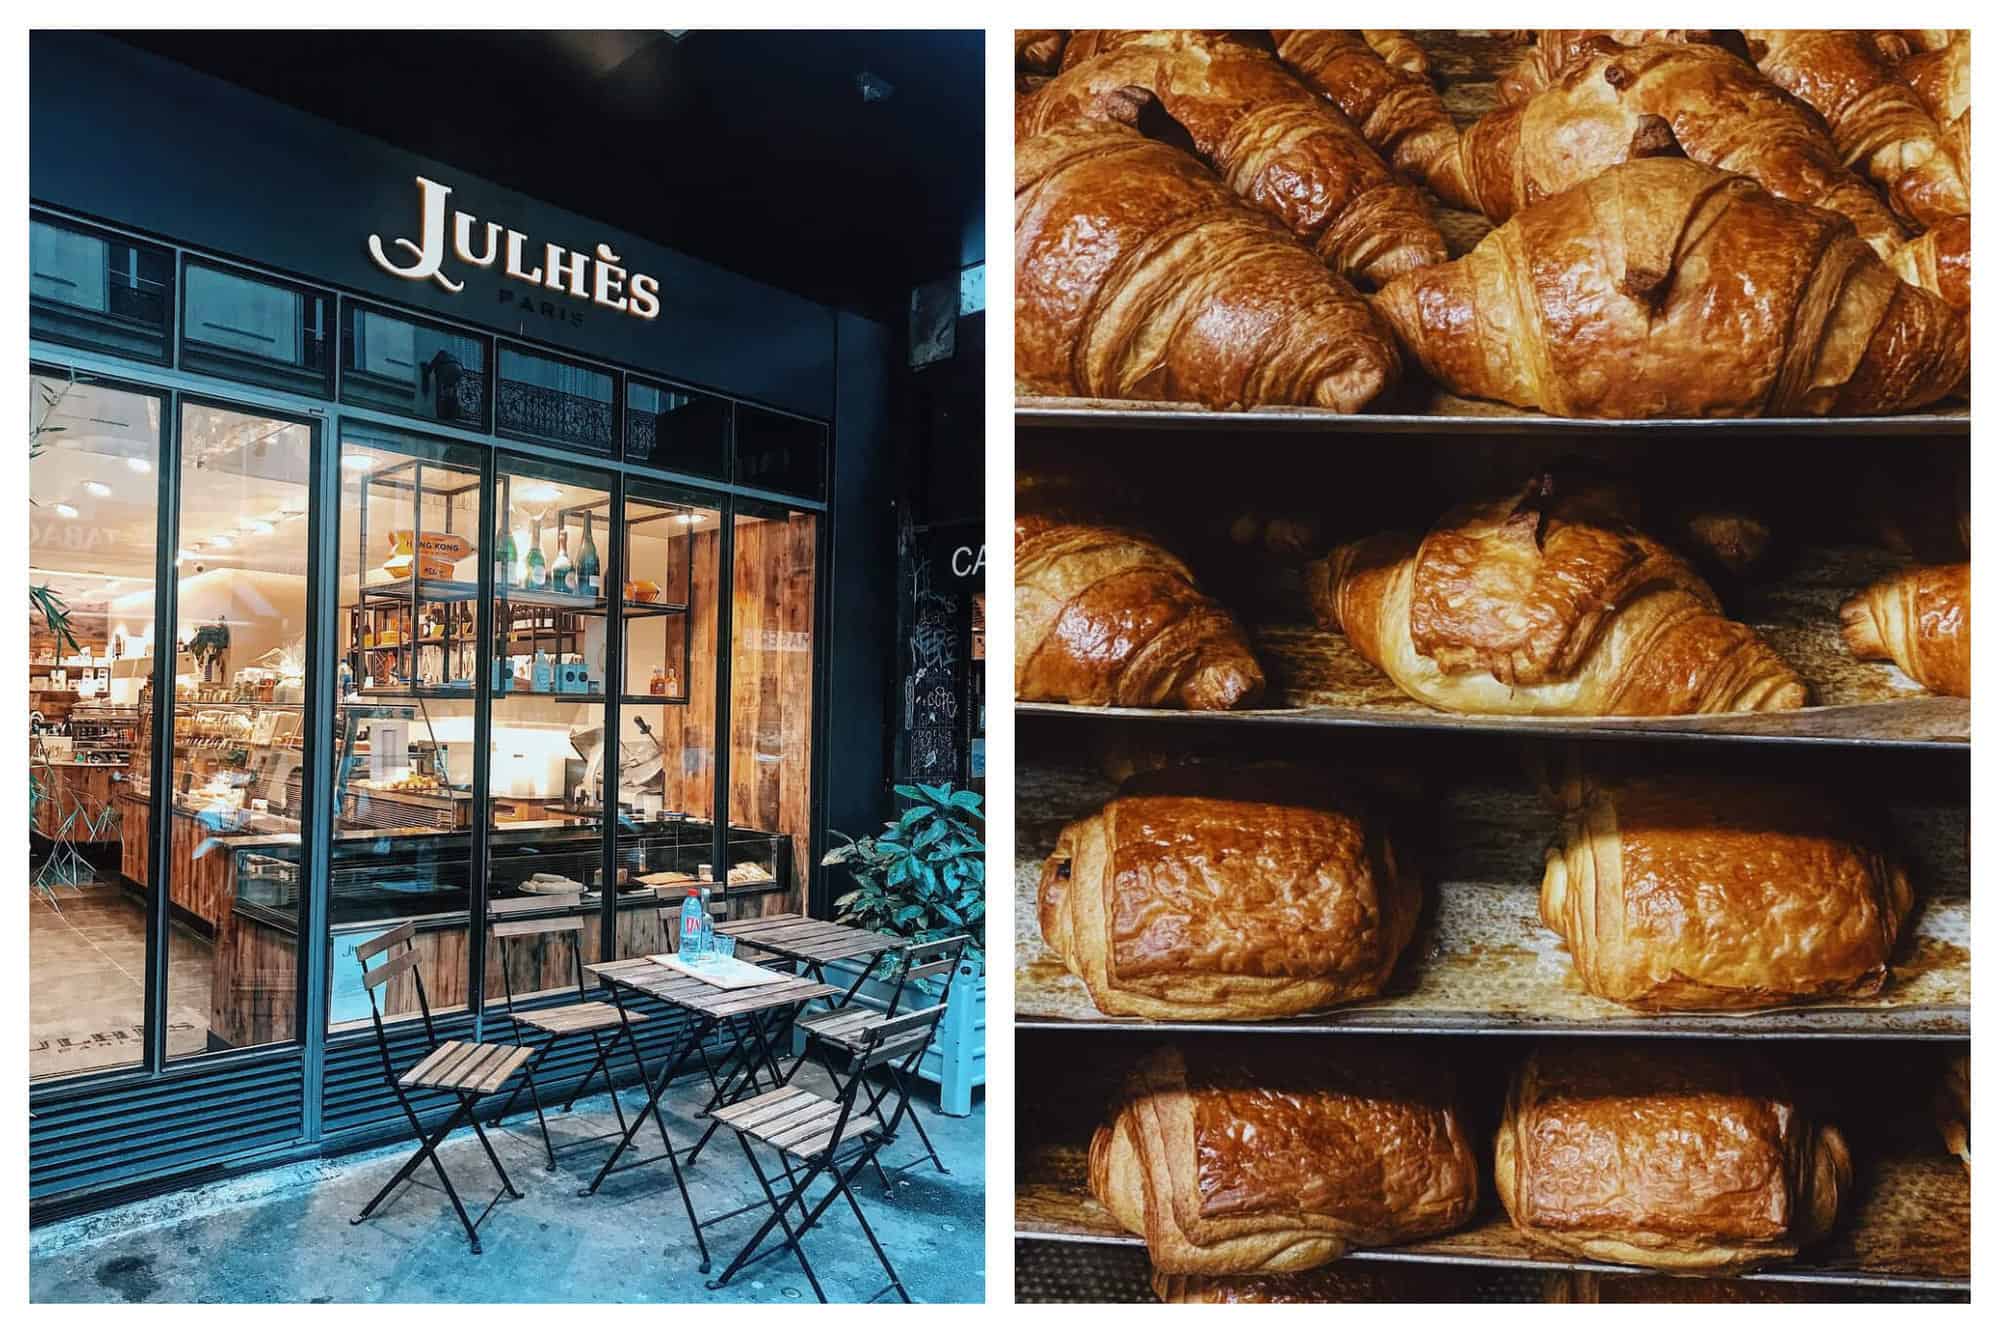 left: the exterior of julhes with wrought iron chairs. right: fresh baked croissants 